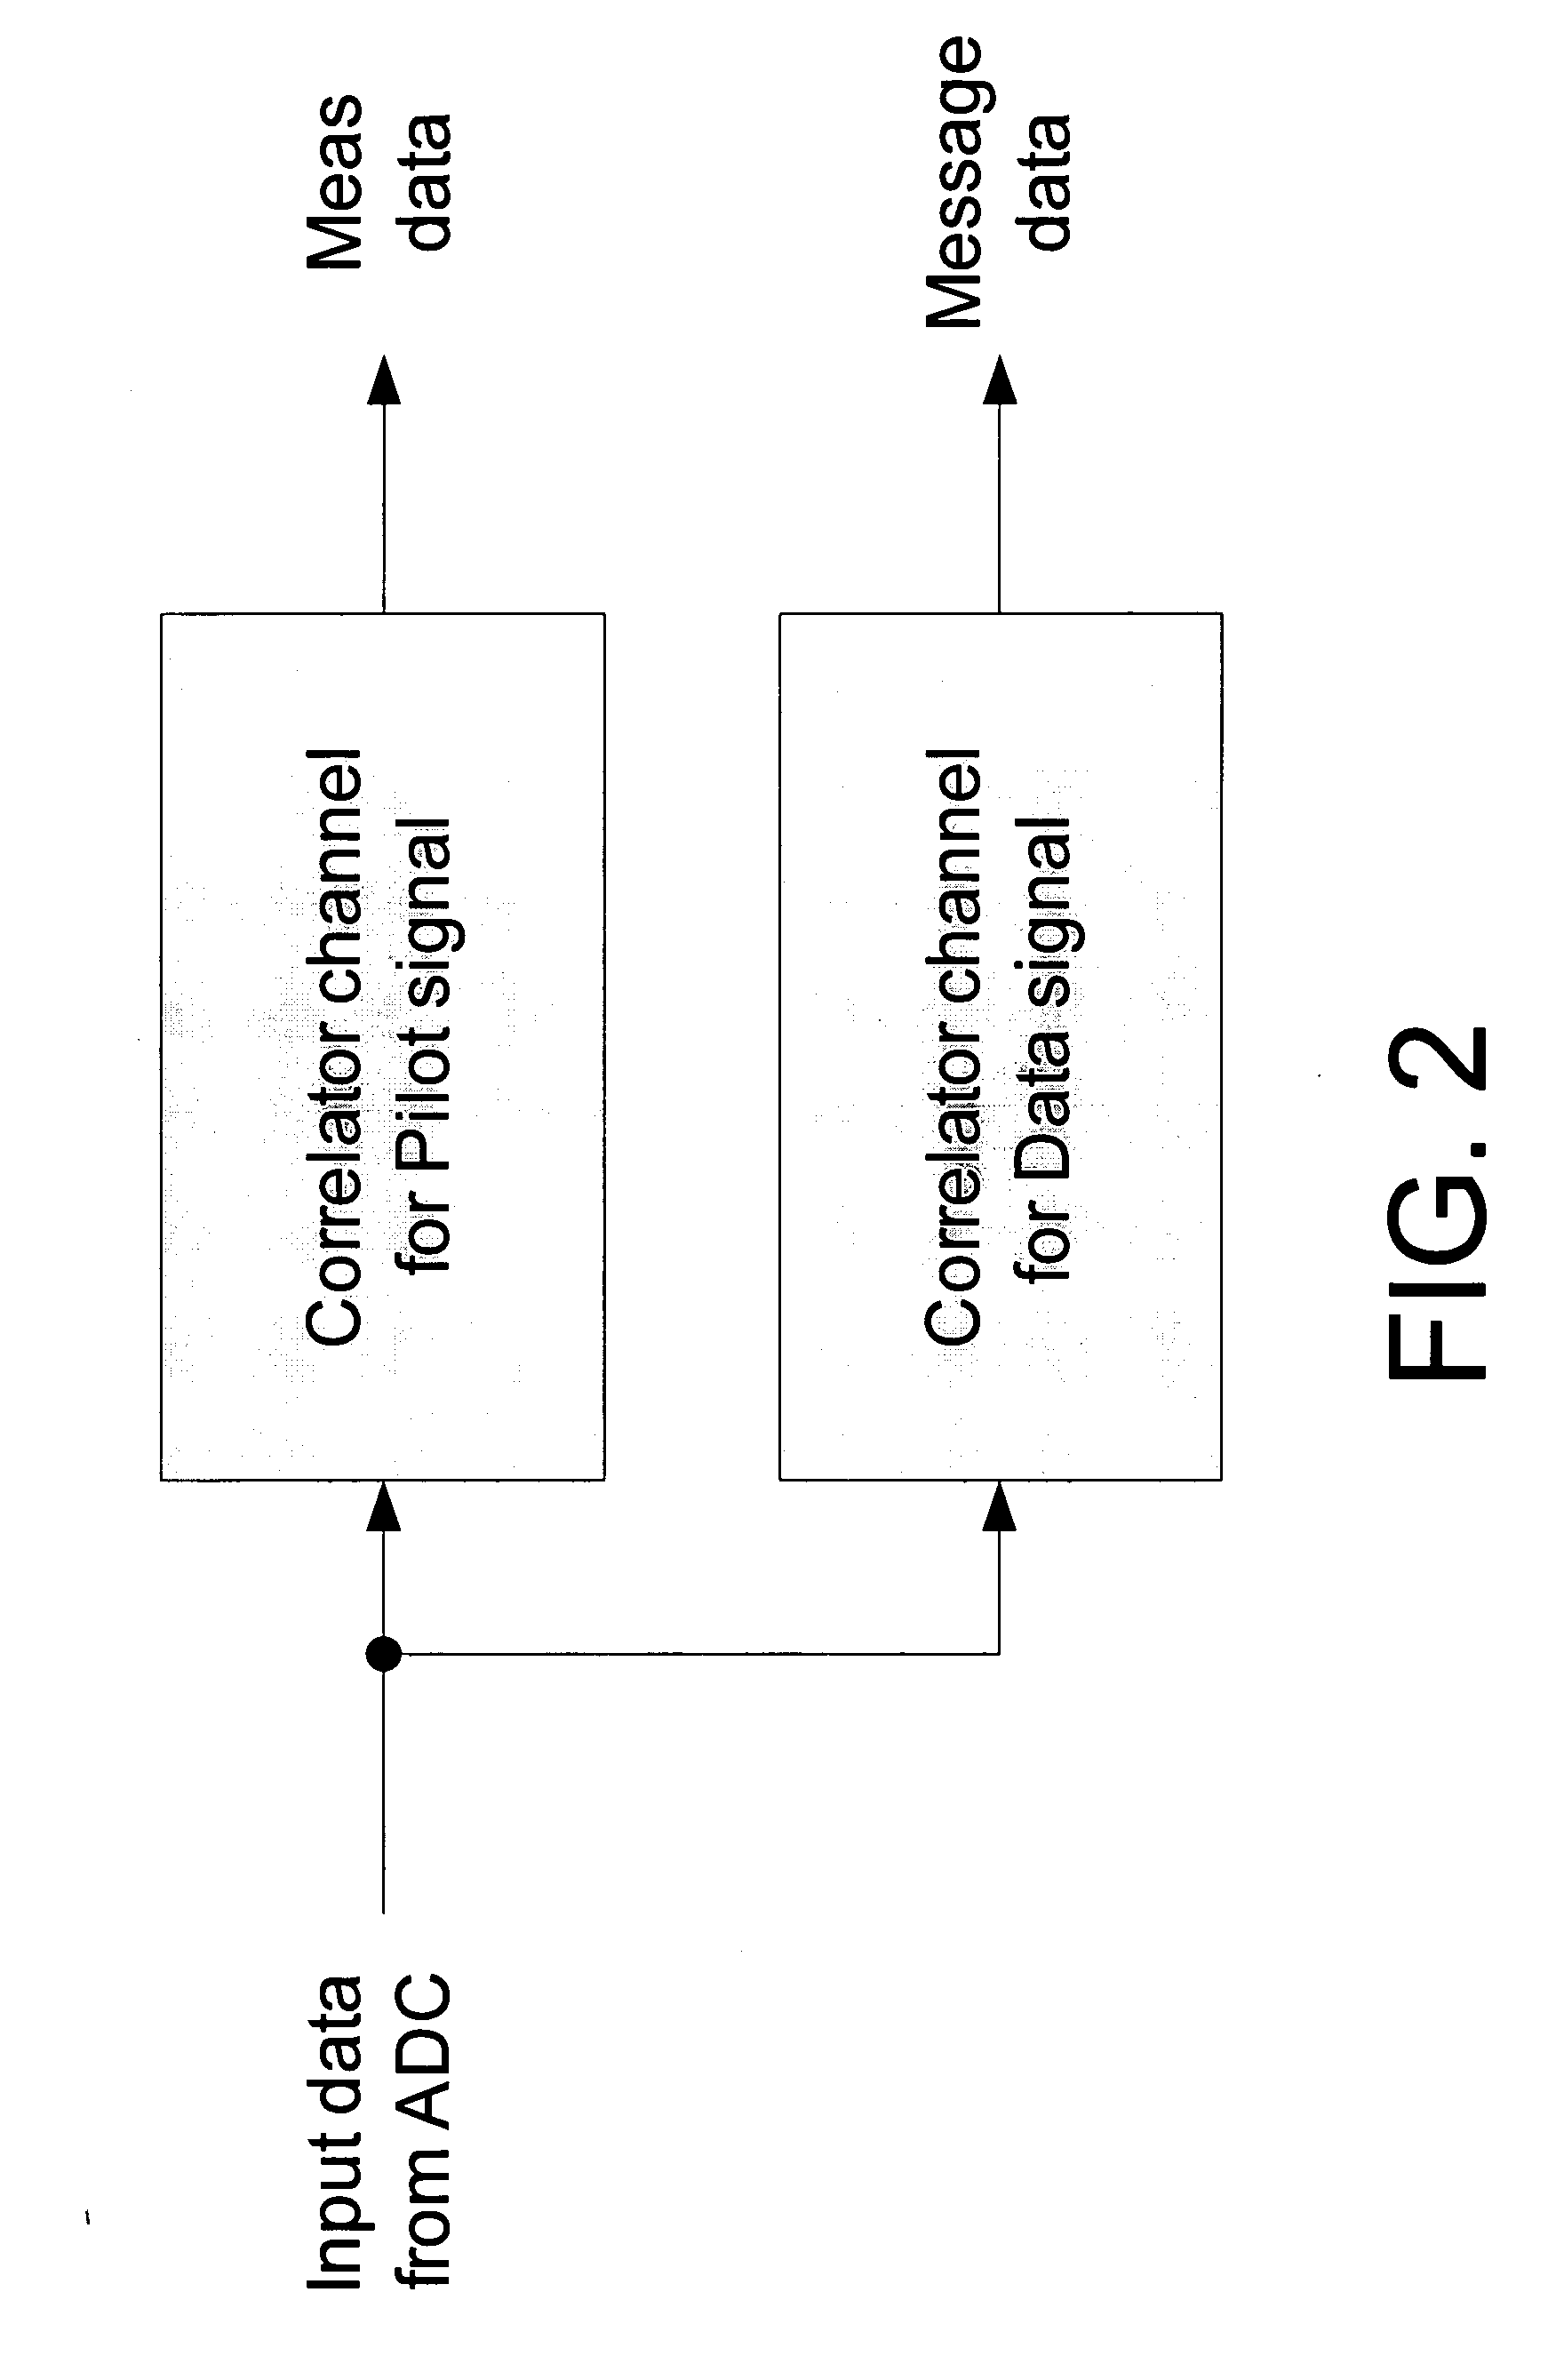 System and method for providing optimized receiver architectures for combined pilot and data signal tracking